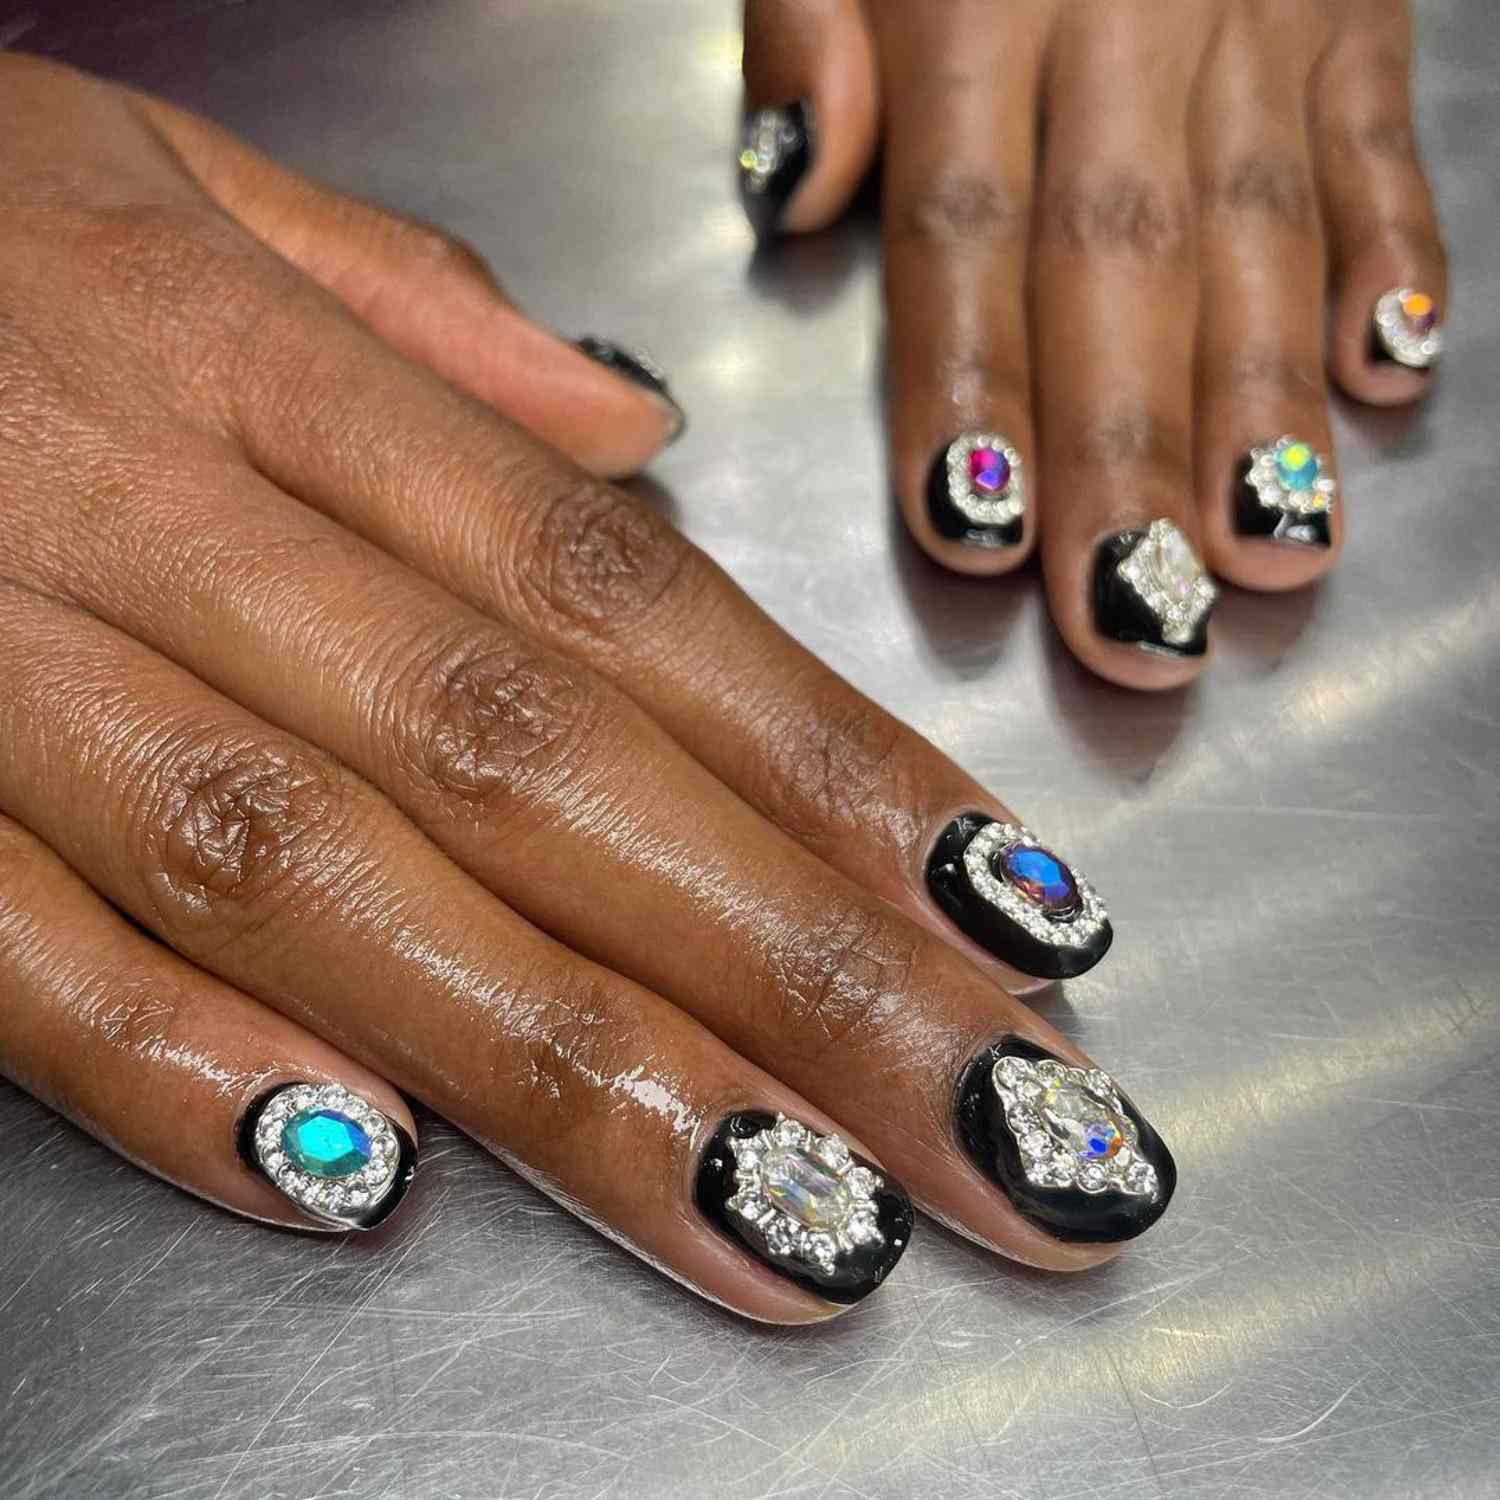 Hands with black nails studded with gemstones.